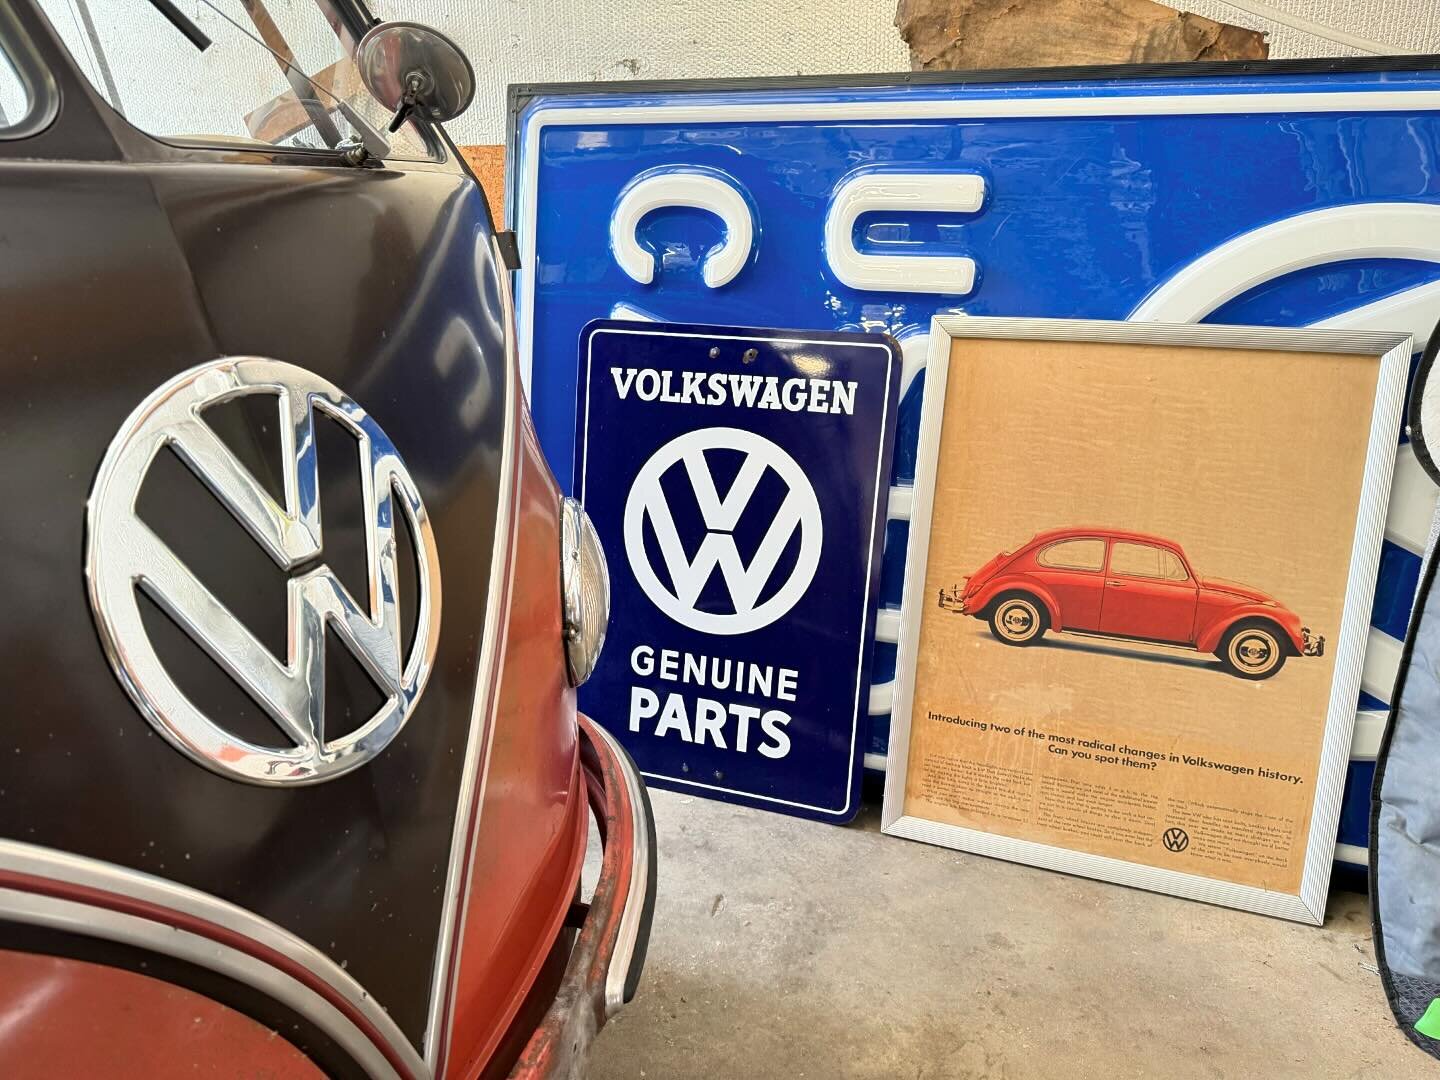 Some of my antiques patiently waiting for the big move
&bull;
&bull;
&bull;
#VW #Volkswagen #Bus #Splitbus #barndoor #barndoordeluxe #porcelain #dealerposter #signage #antiques #mantiques #automobilia #aircooled